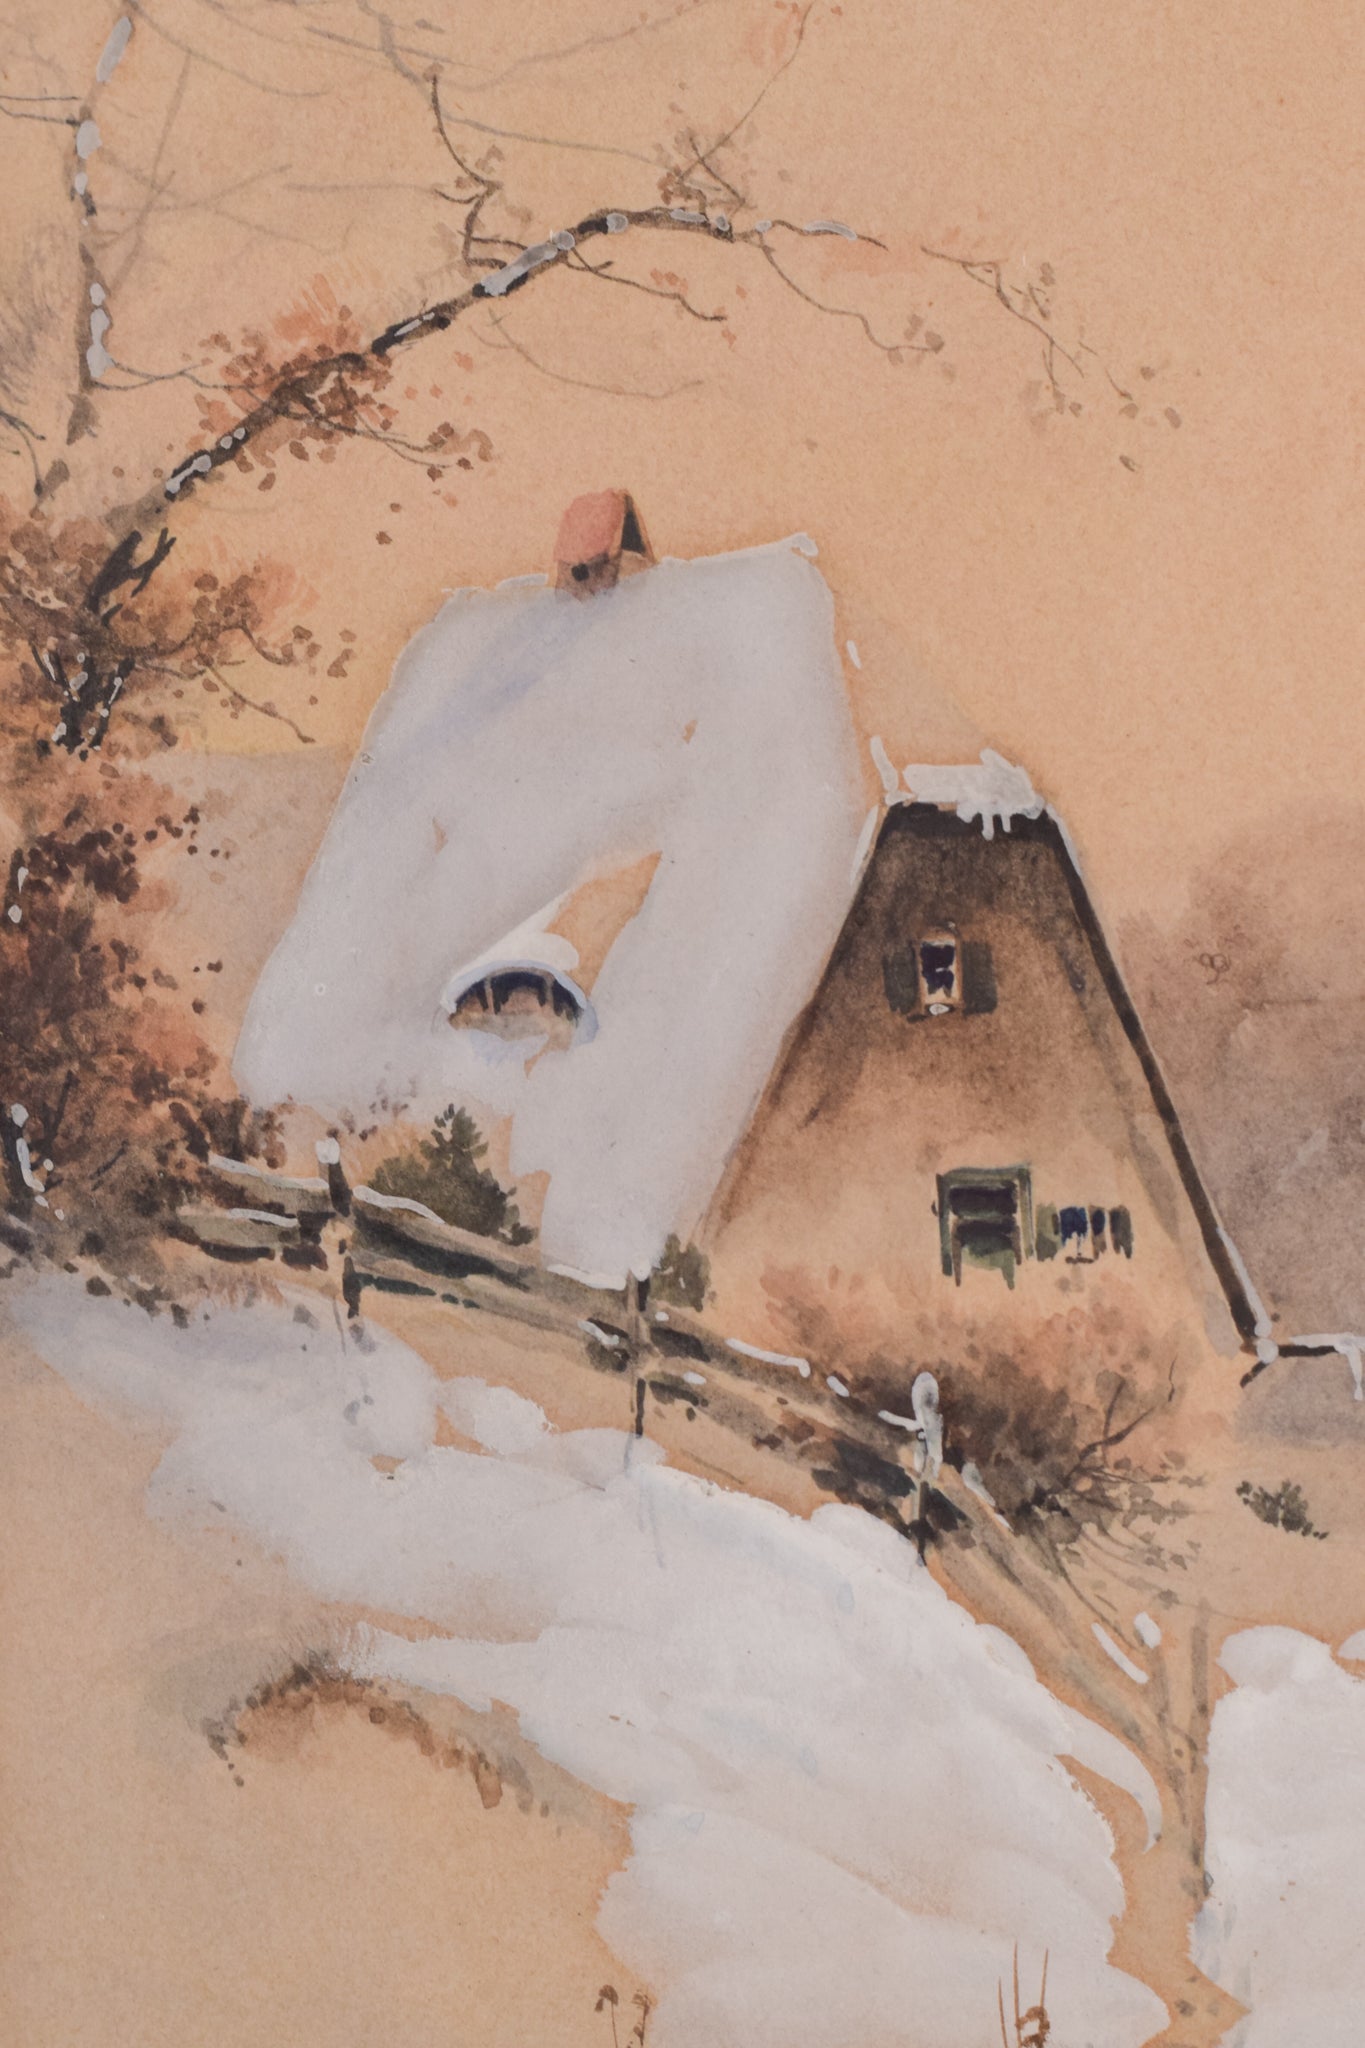 Snowscape Watercolour of a House mounted in a exquisite secessionist art Nouveau frame